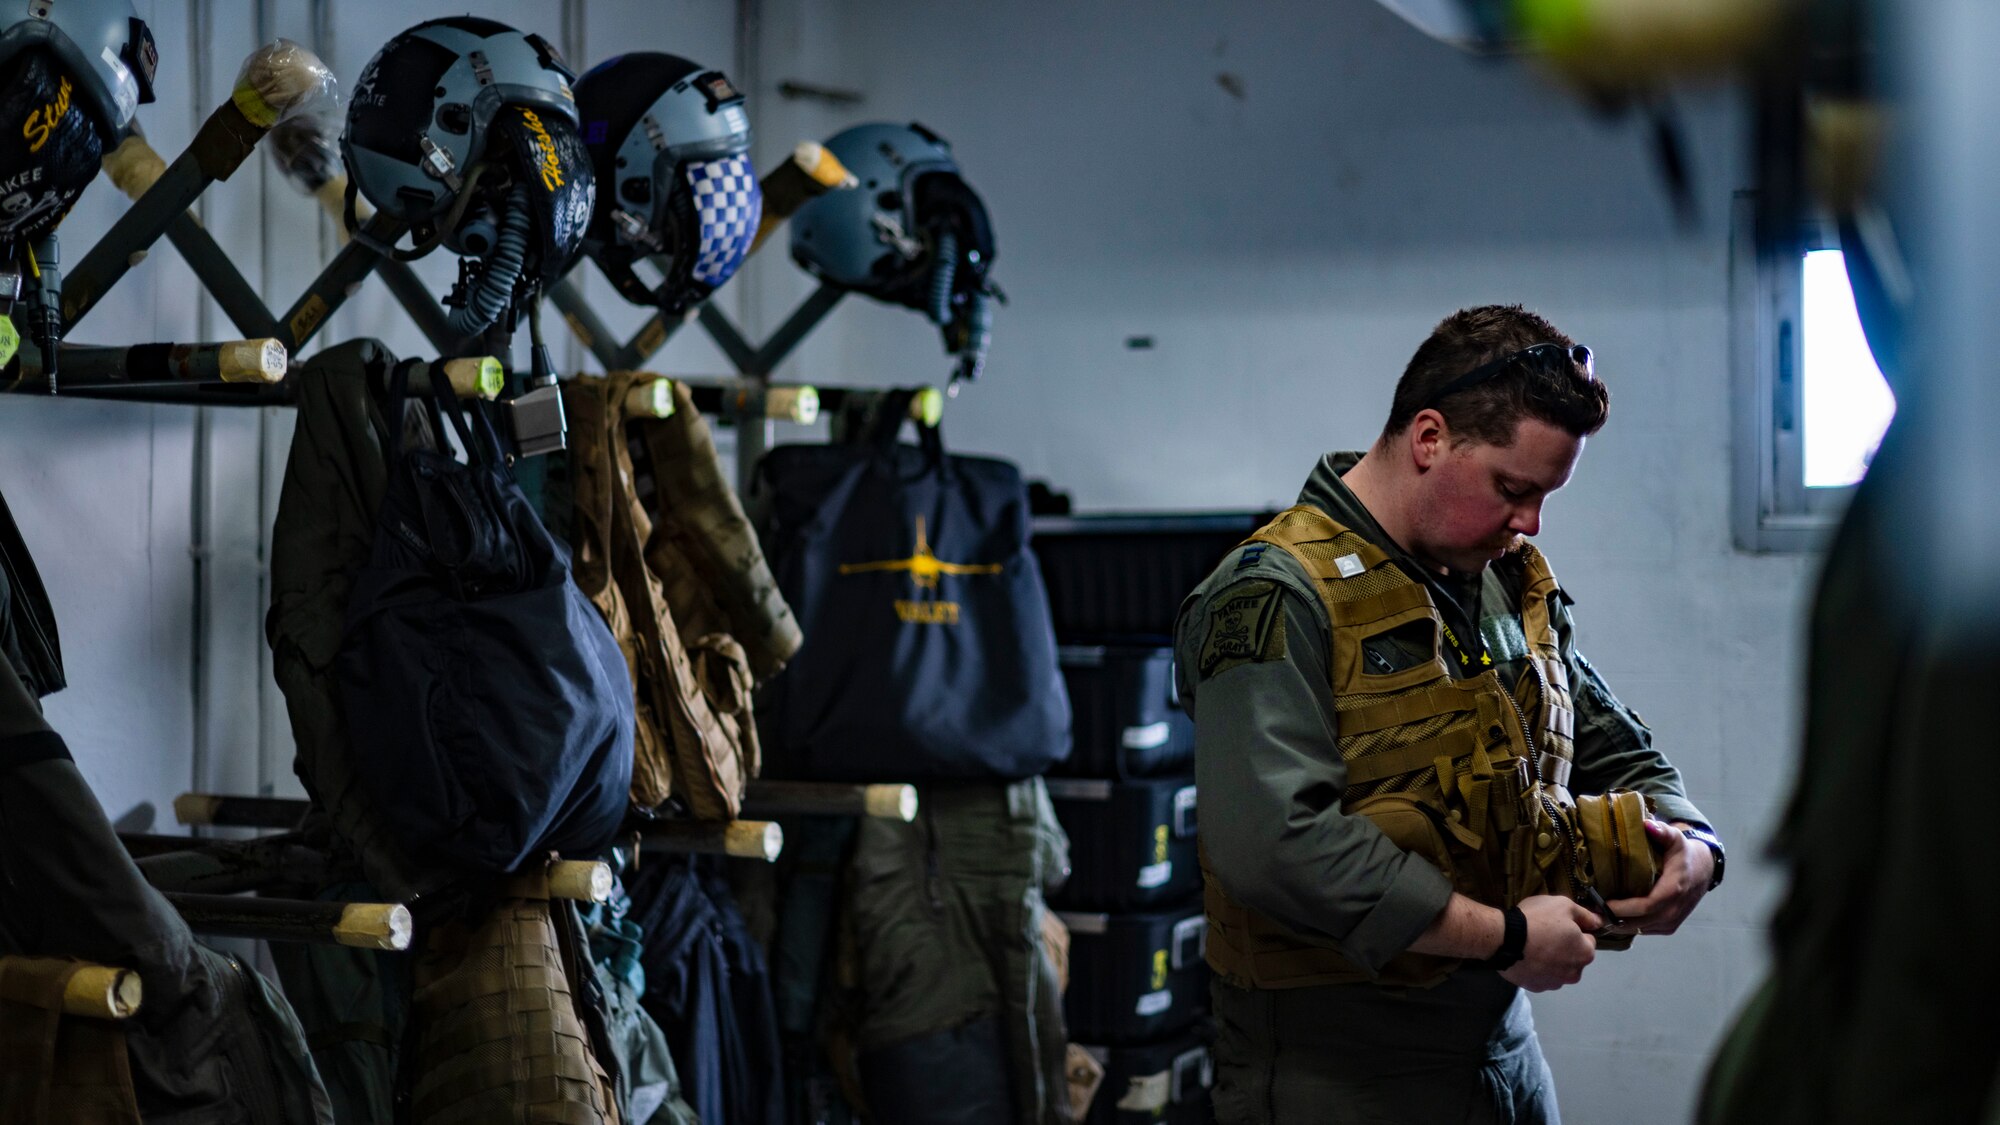 An F-16 Fighting Falcon pilot, dons flight gear before leading U.S. Air Force integration for an amphibious assault exercise